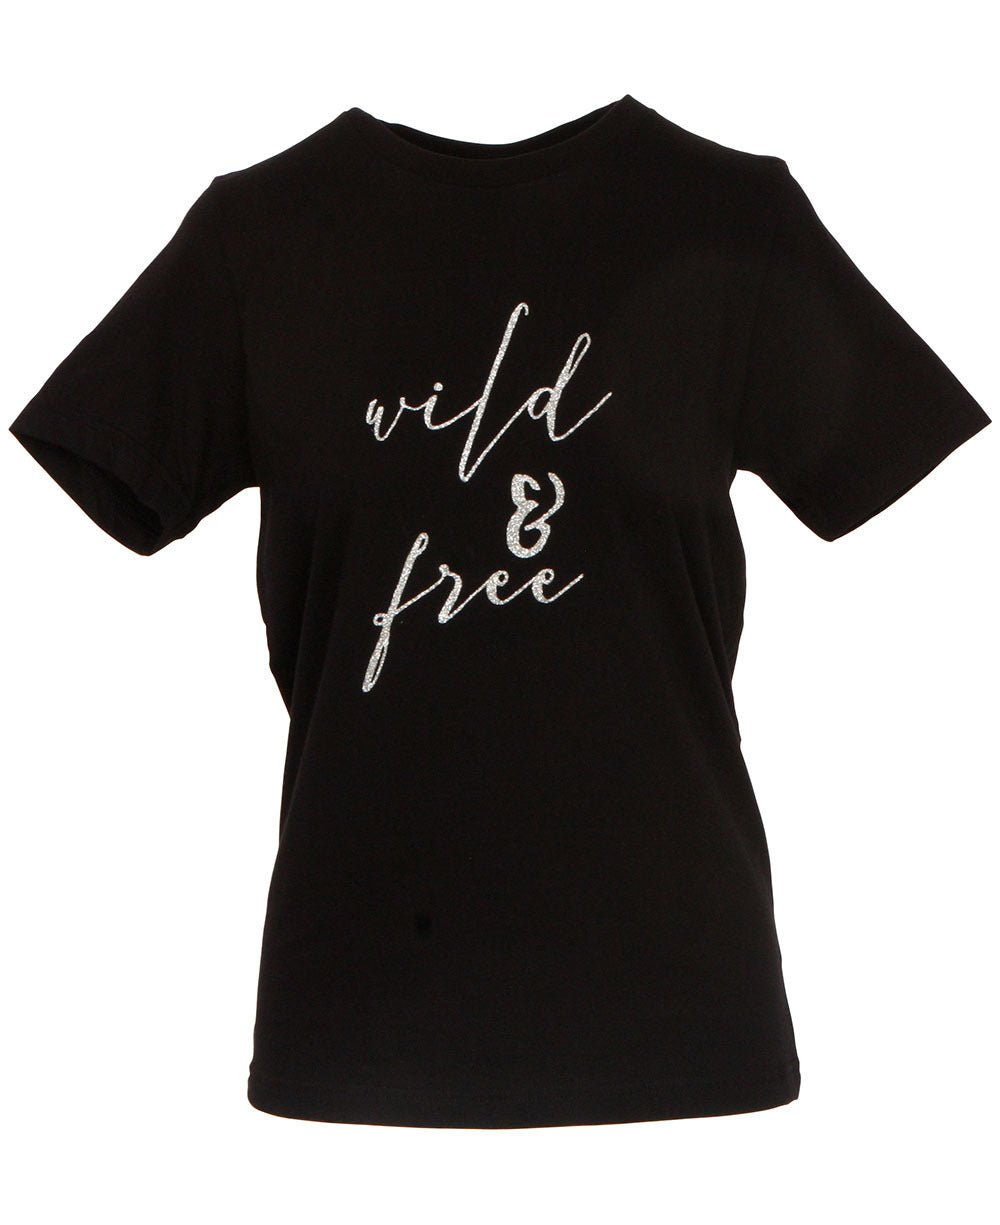 Wild and Free Women’s Sparkly Tee - Inspirational Apparel S